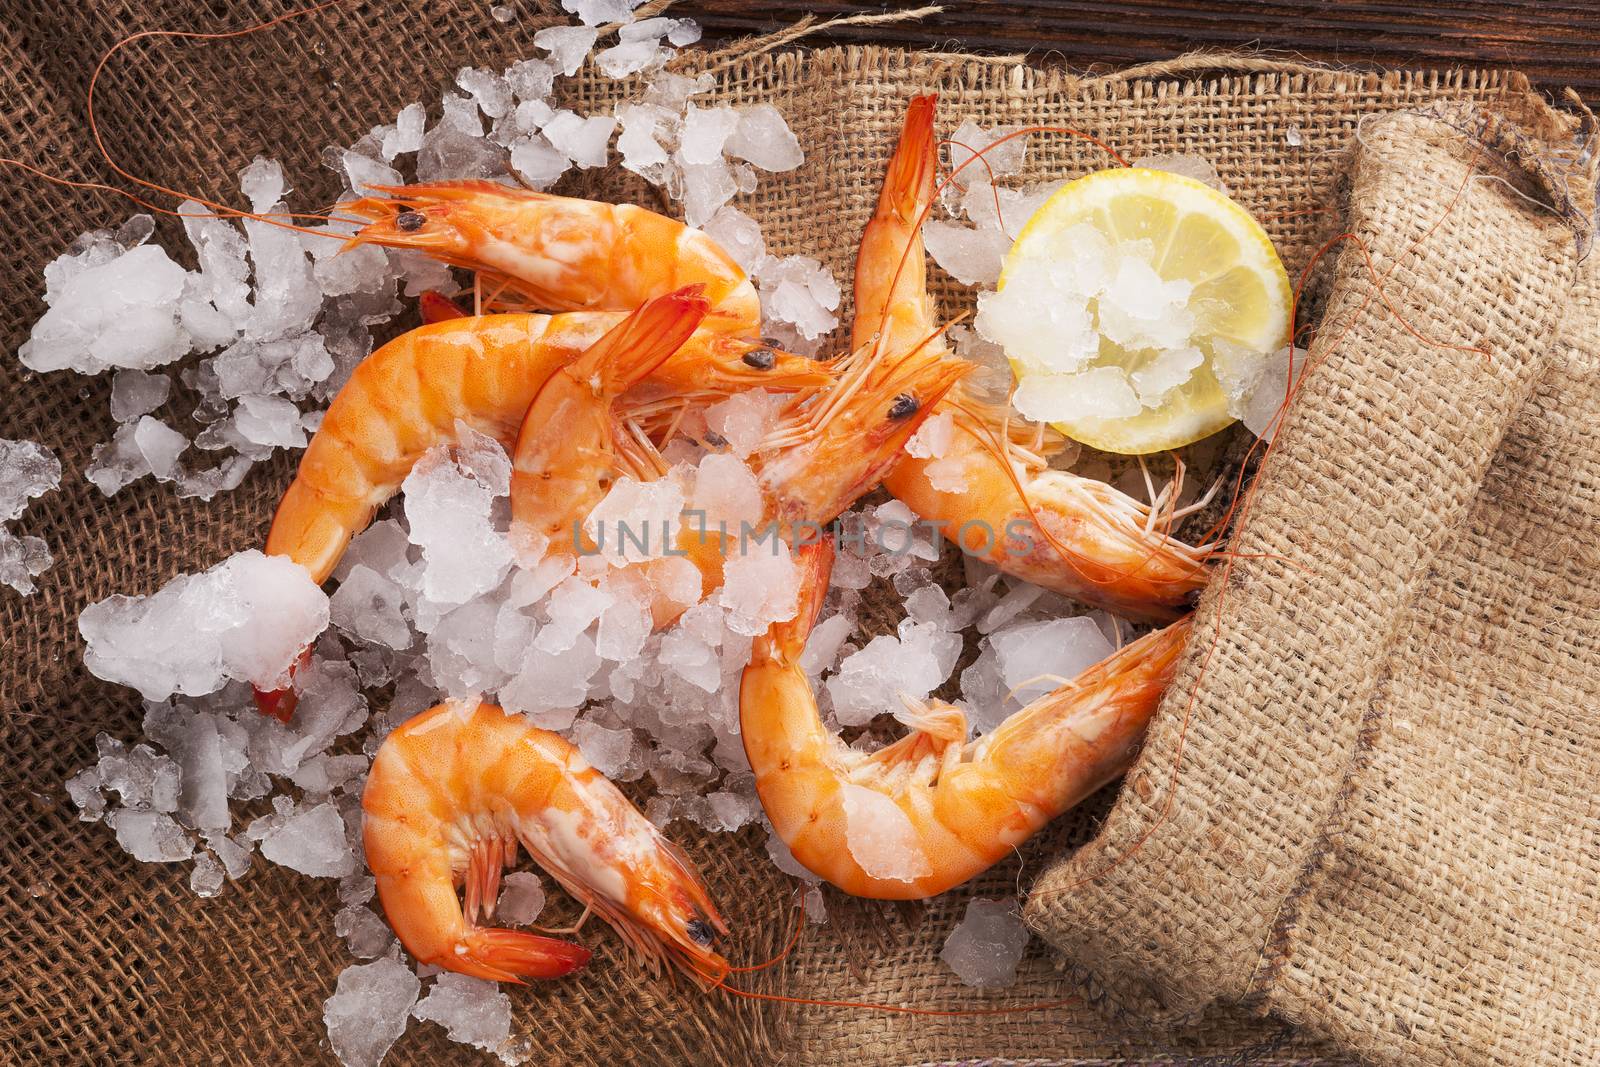 Fresh shrimp with lemon on ice in brown burlap bag on wooden table, top view. Culinary seafood eating.